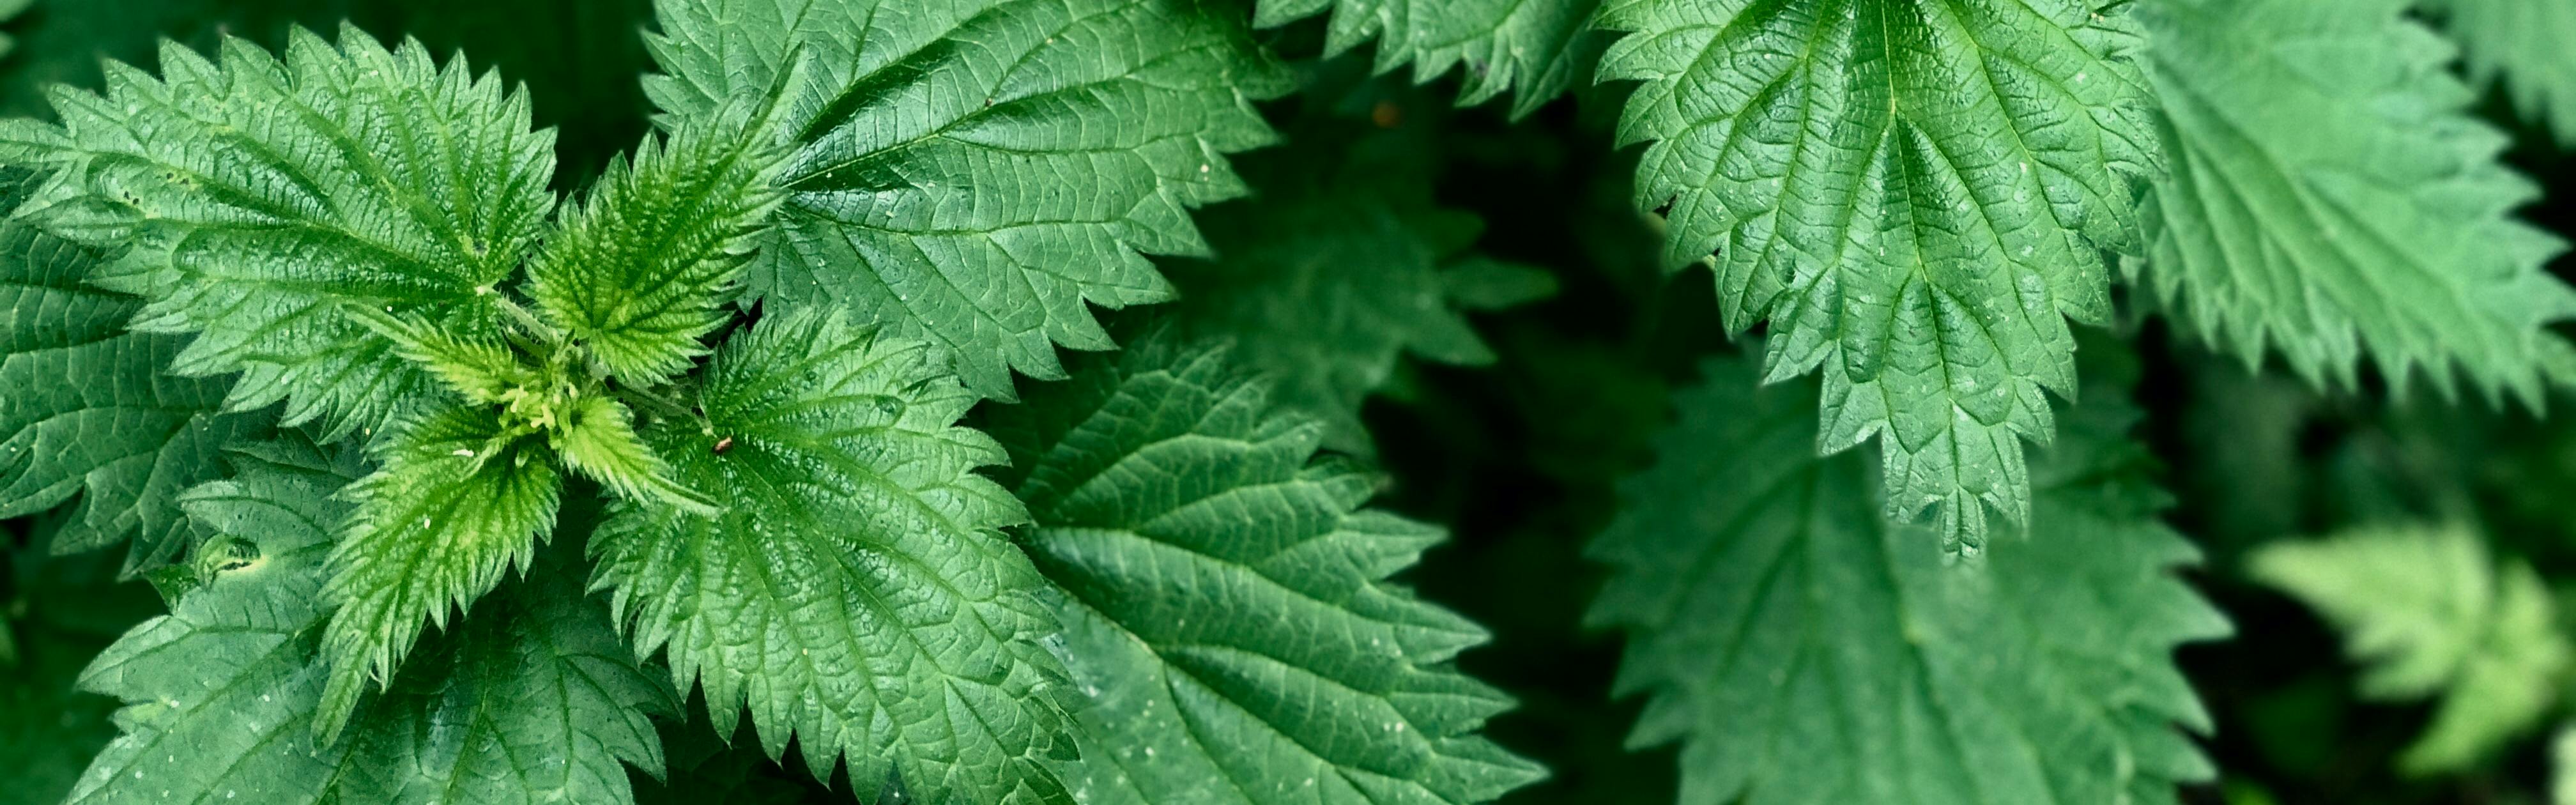 A close-up image of stinging nettles. 